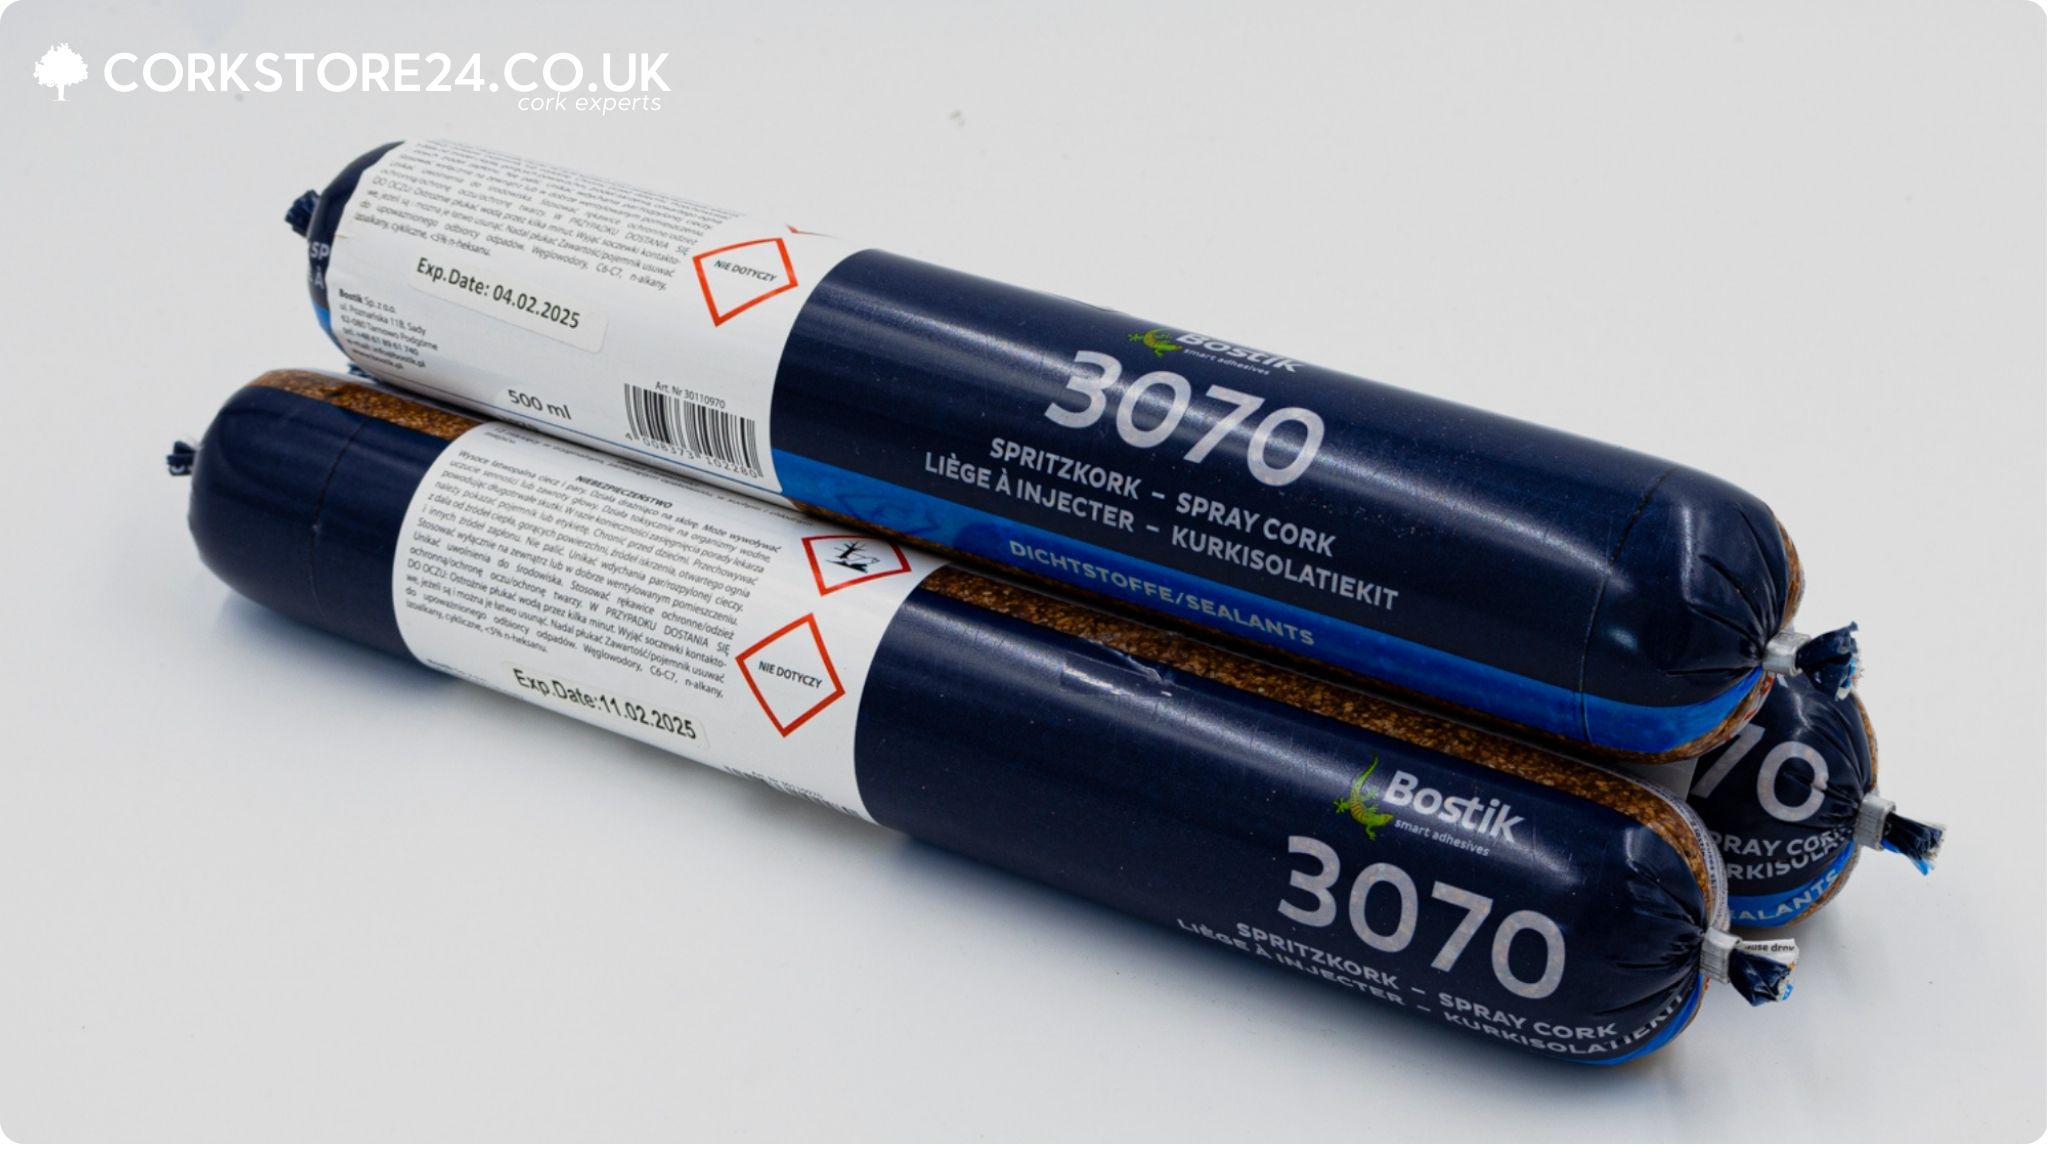 Two tubes of adhesive with blue and white labels, branded Bostik 3070. One of the tubes is opened, revealing the cork inside.